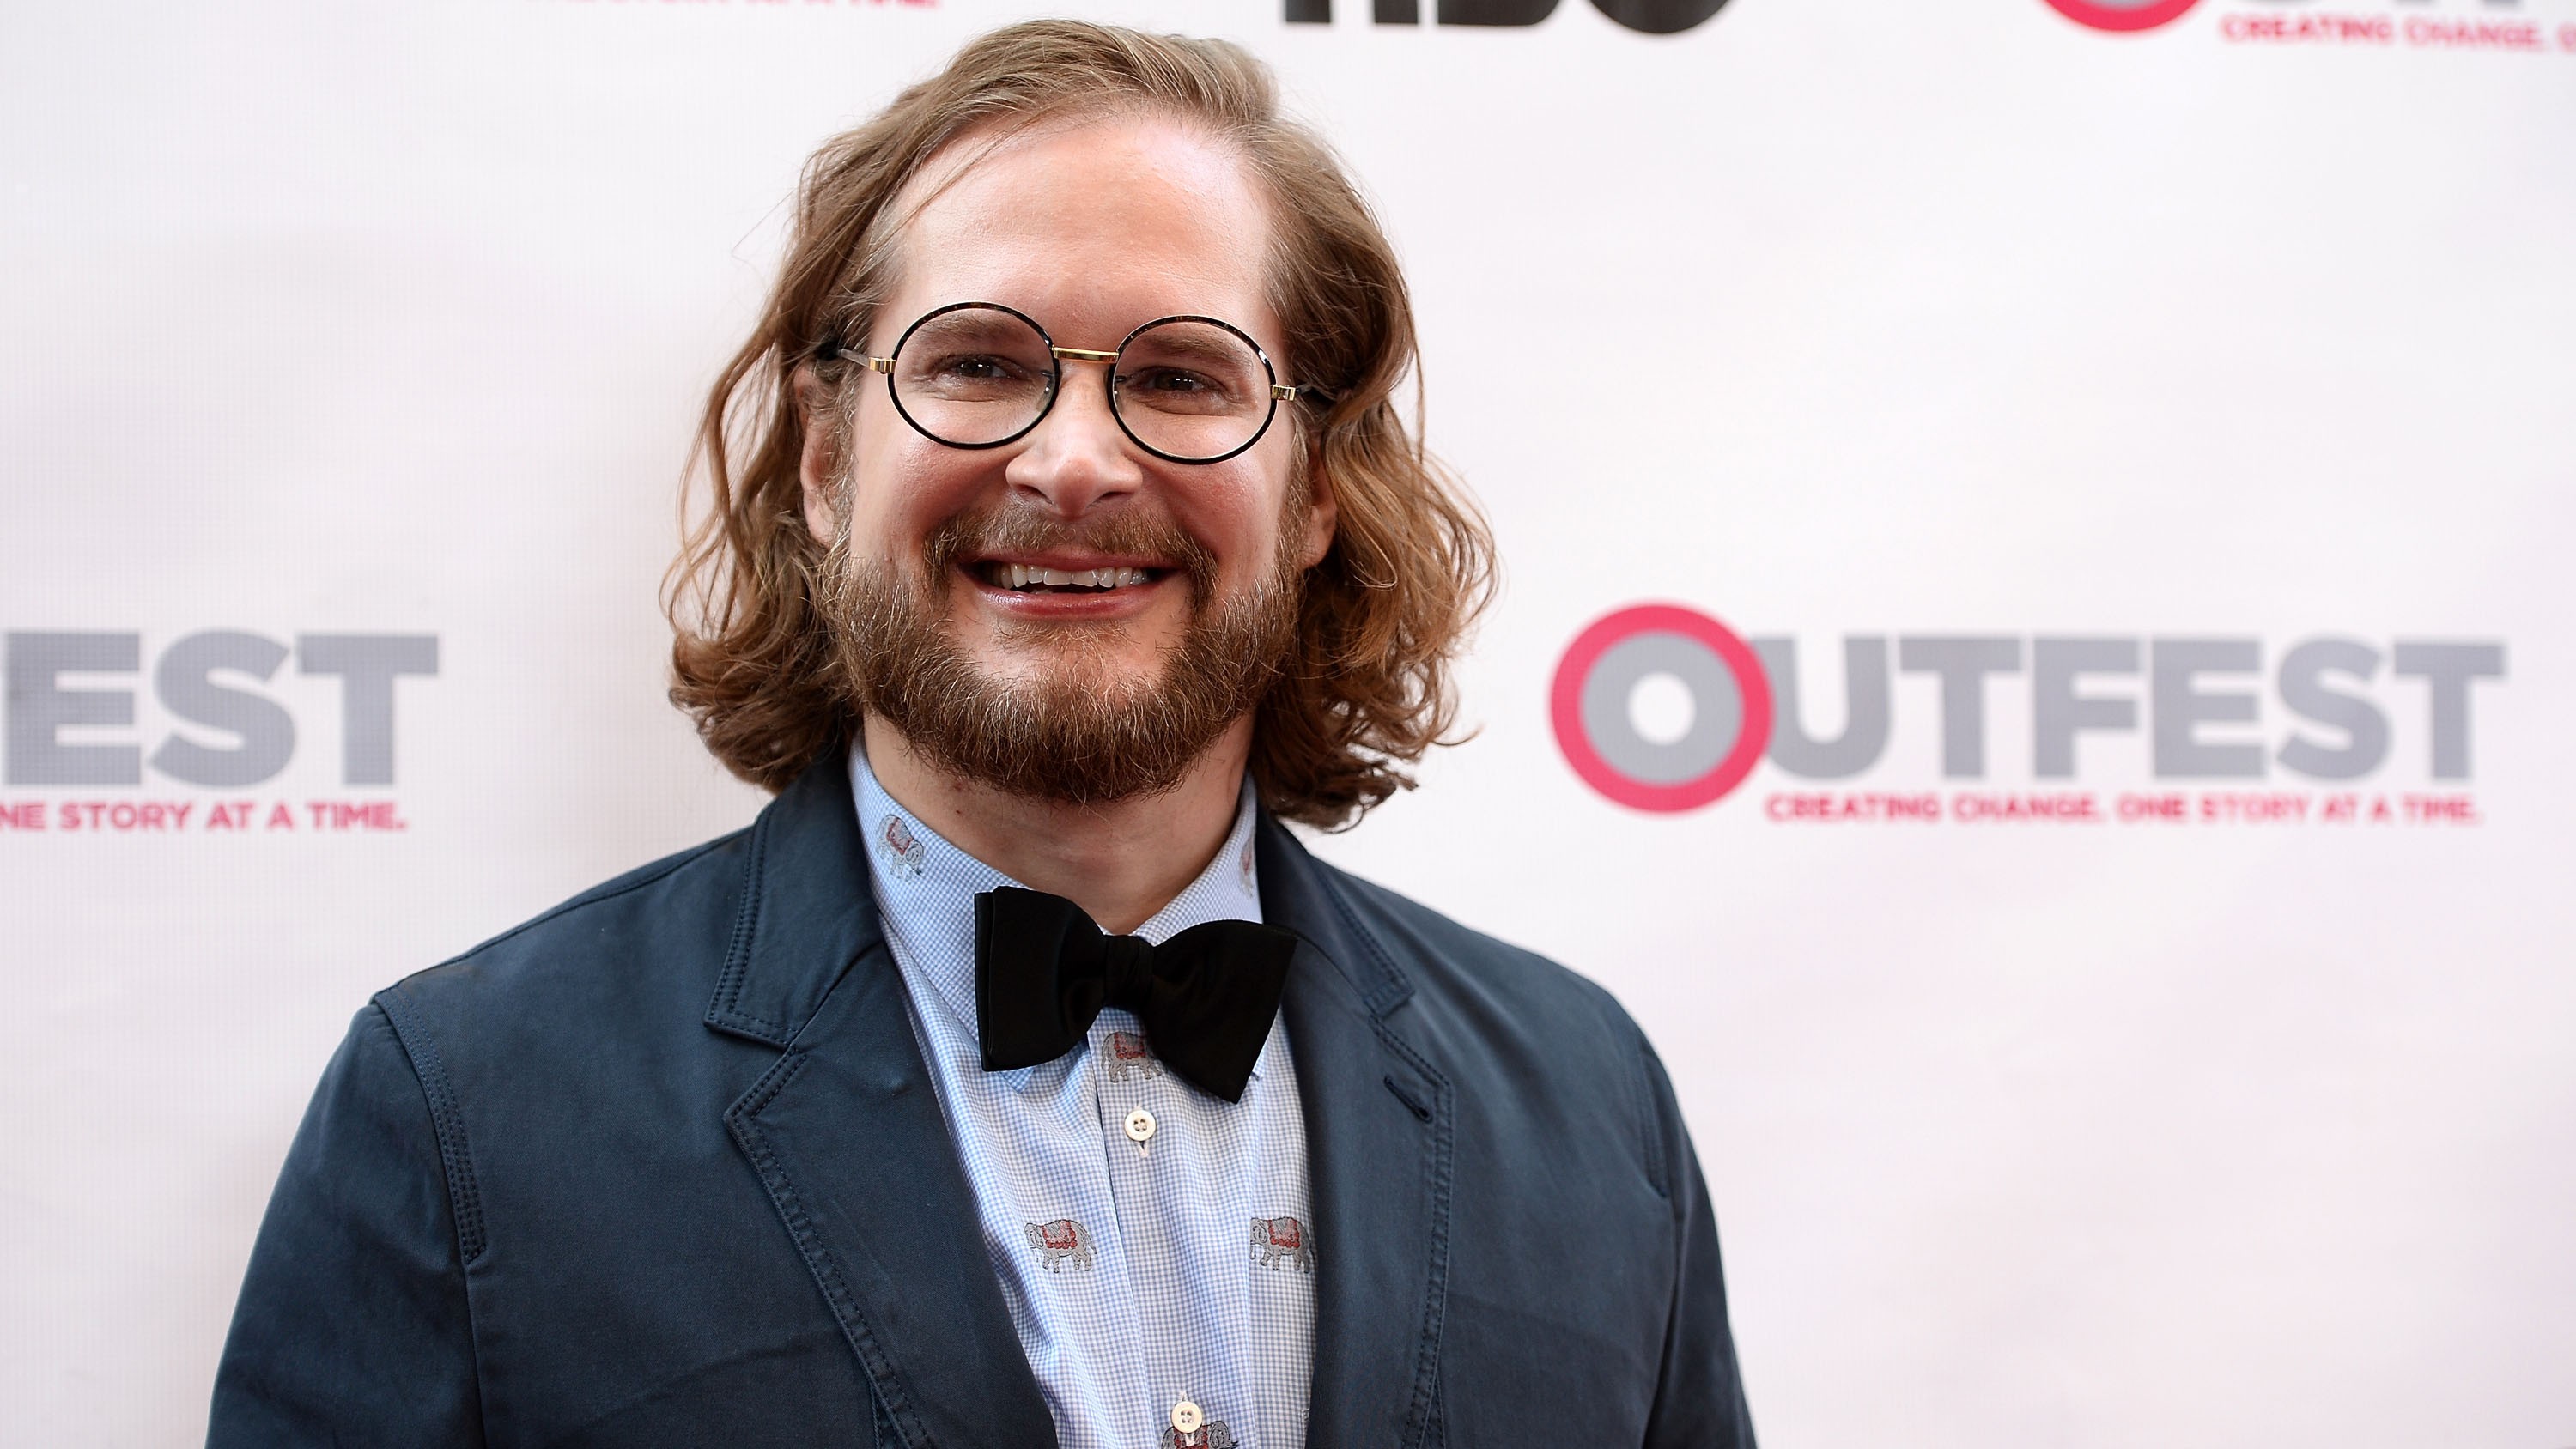  The daily gossip: 'Hannibal' creator Bryan Fuller sued for sexual harassment, Drake to take a break from music over stomach problems, and more 